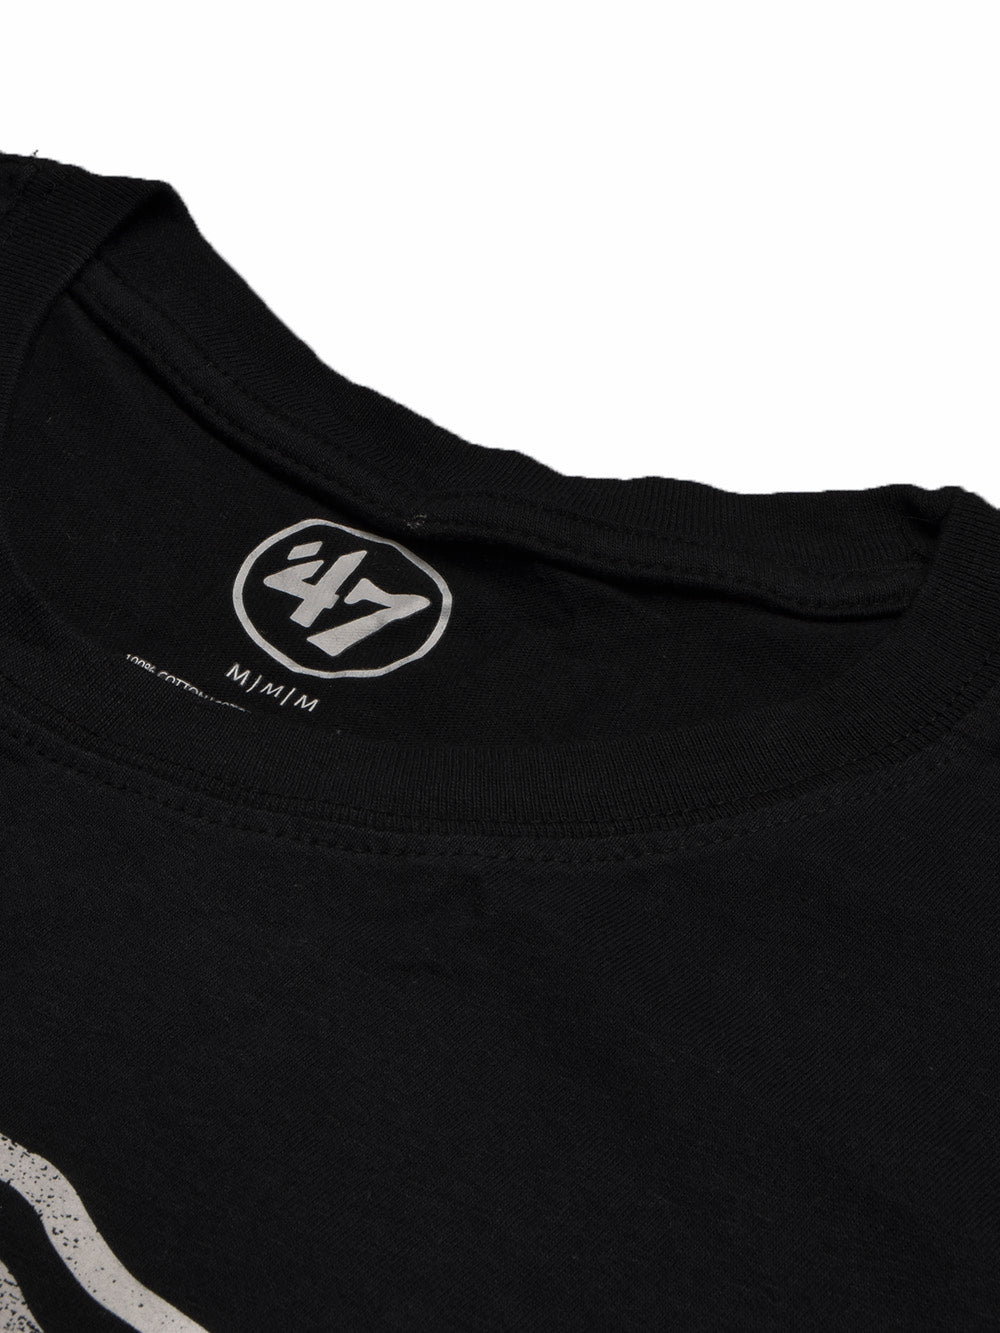 47 Single Jersey Crew Neck Tee Shirt For Men-Black with Print-BE1010